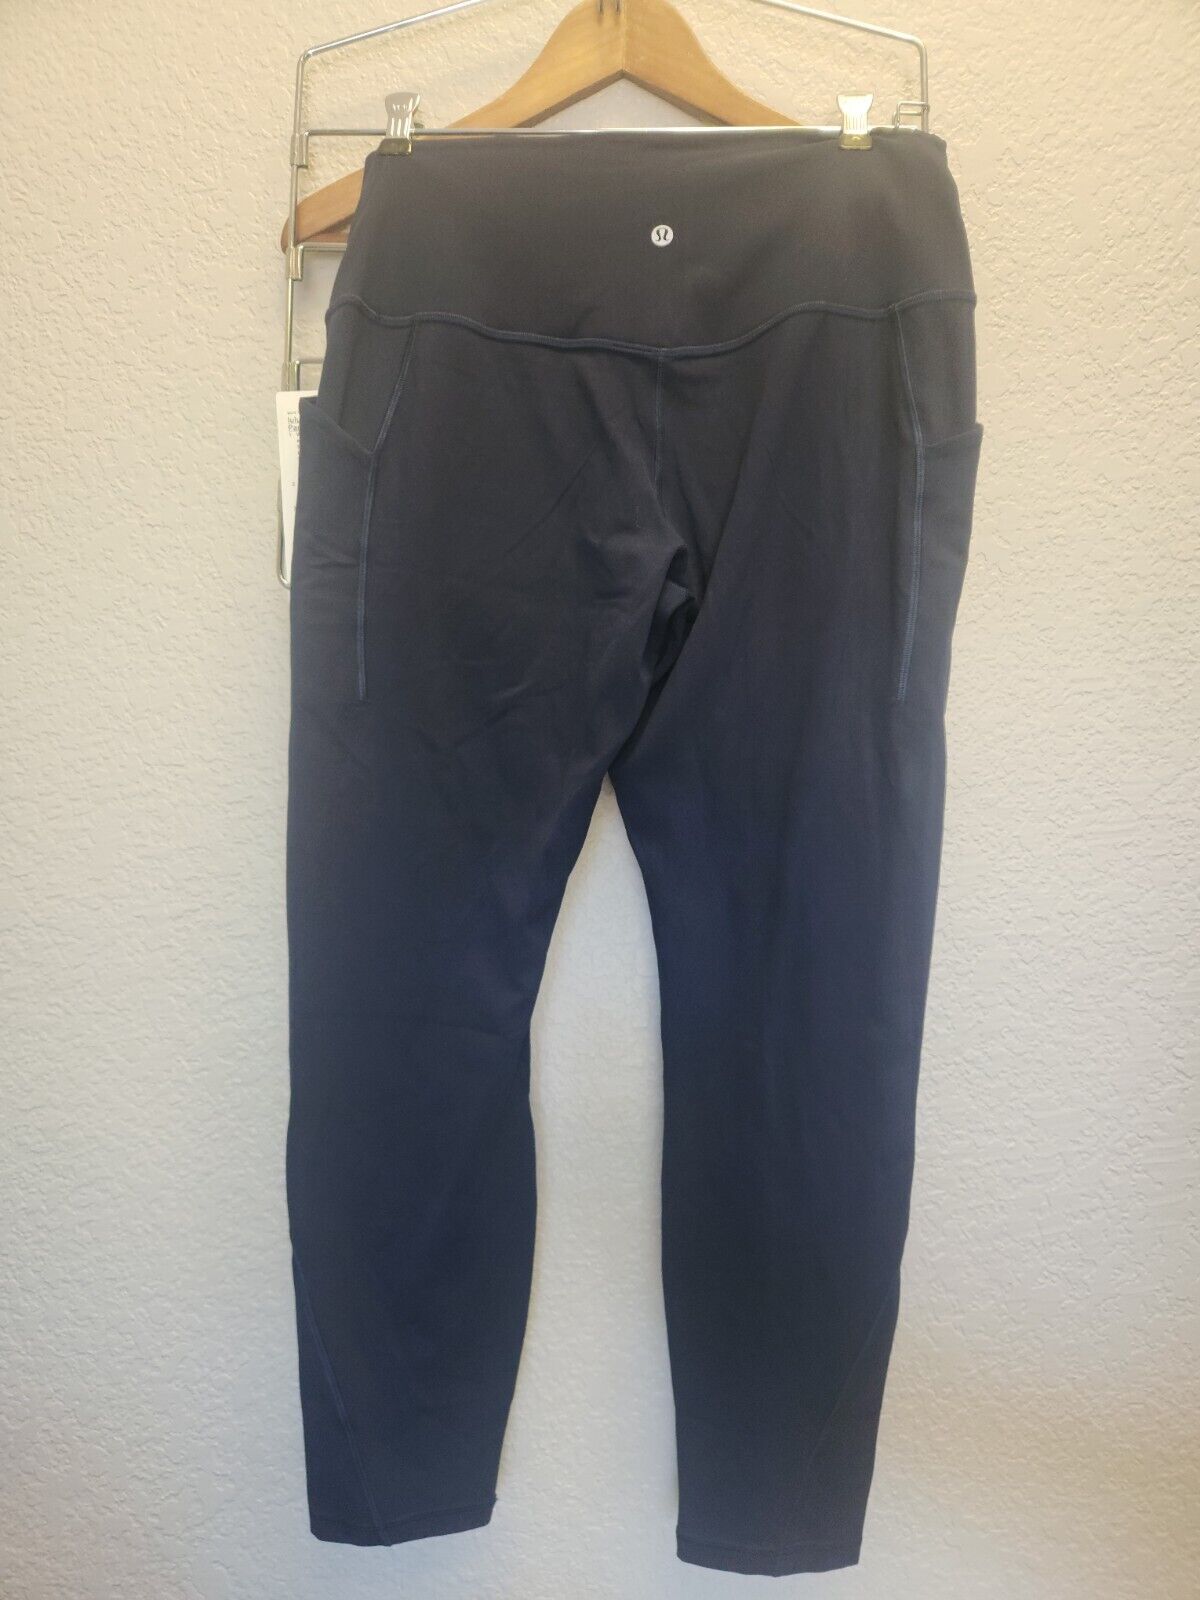 lululemon Align High-Rise Pant with Pockets 25 - True Navy - Size